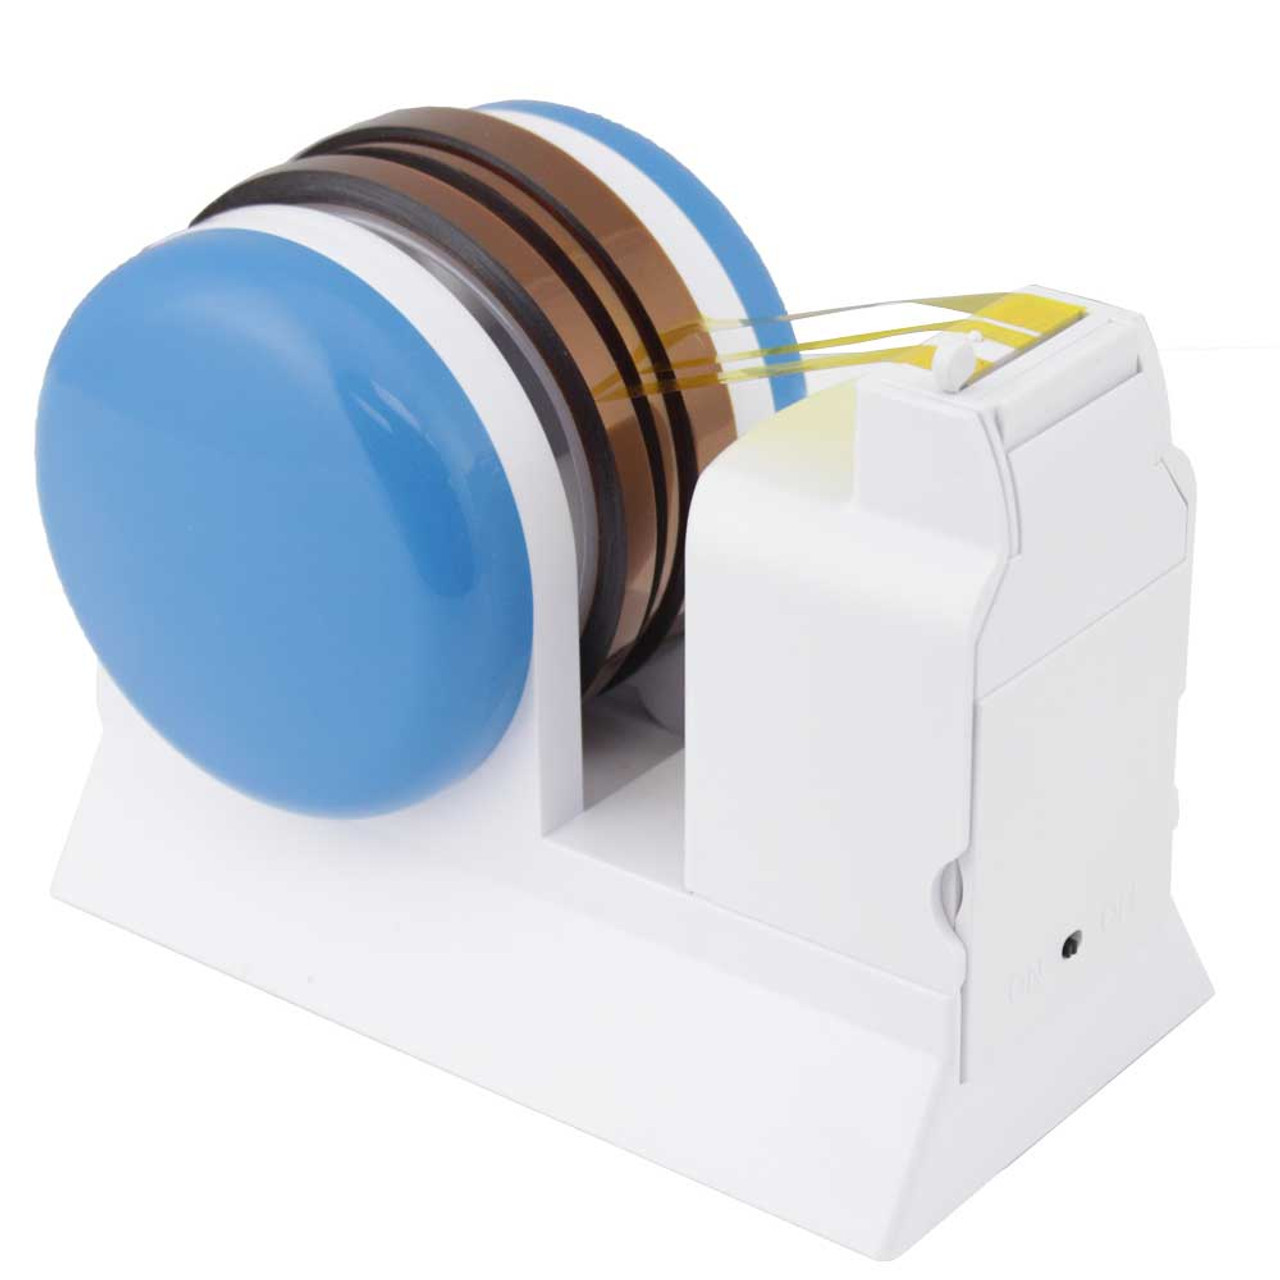 The Tape Thing magnetic tape dispenser